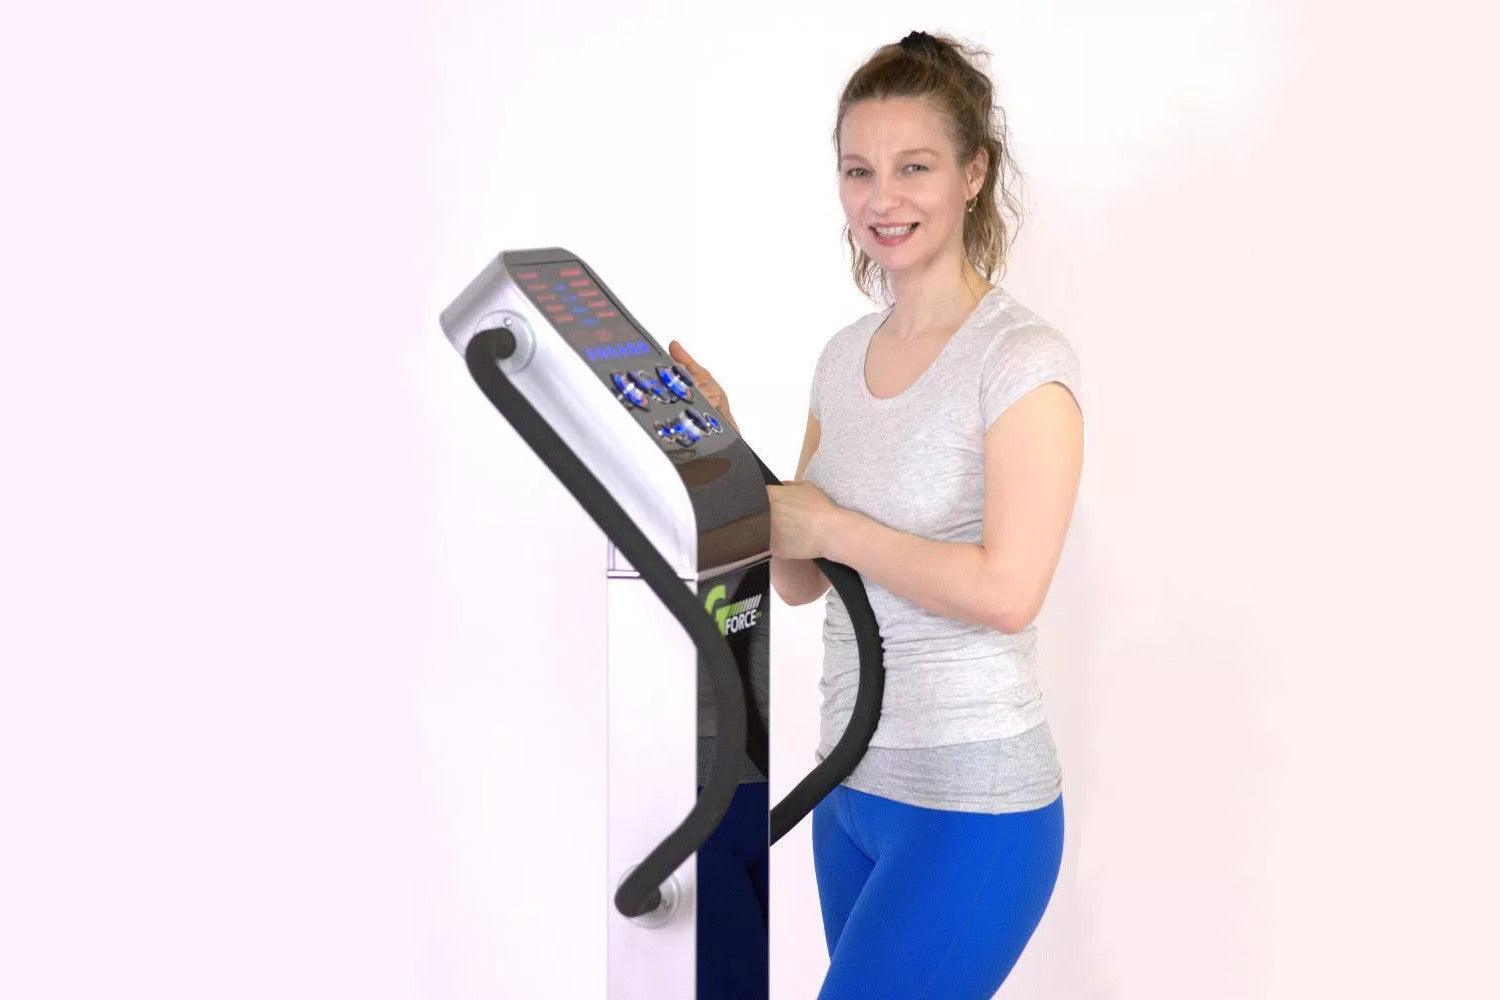 Whole Body Vibration Machine Research of Benefits - HEALTHandMED